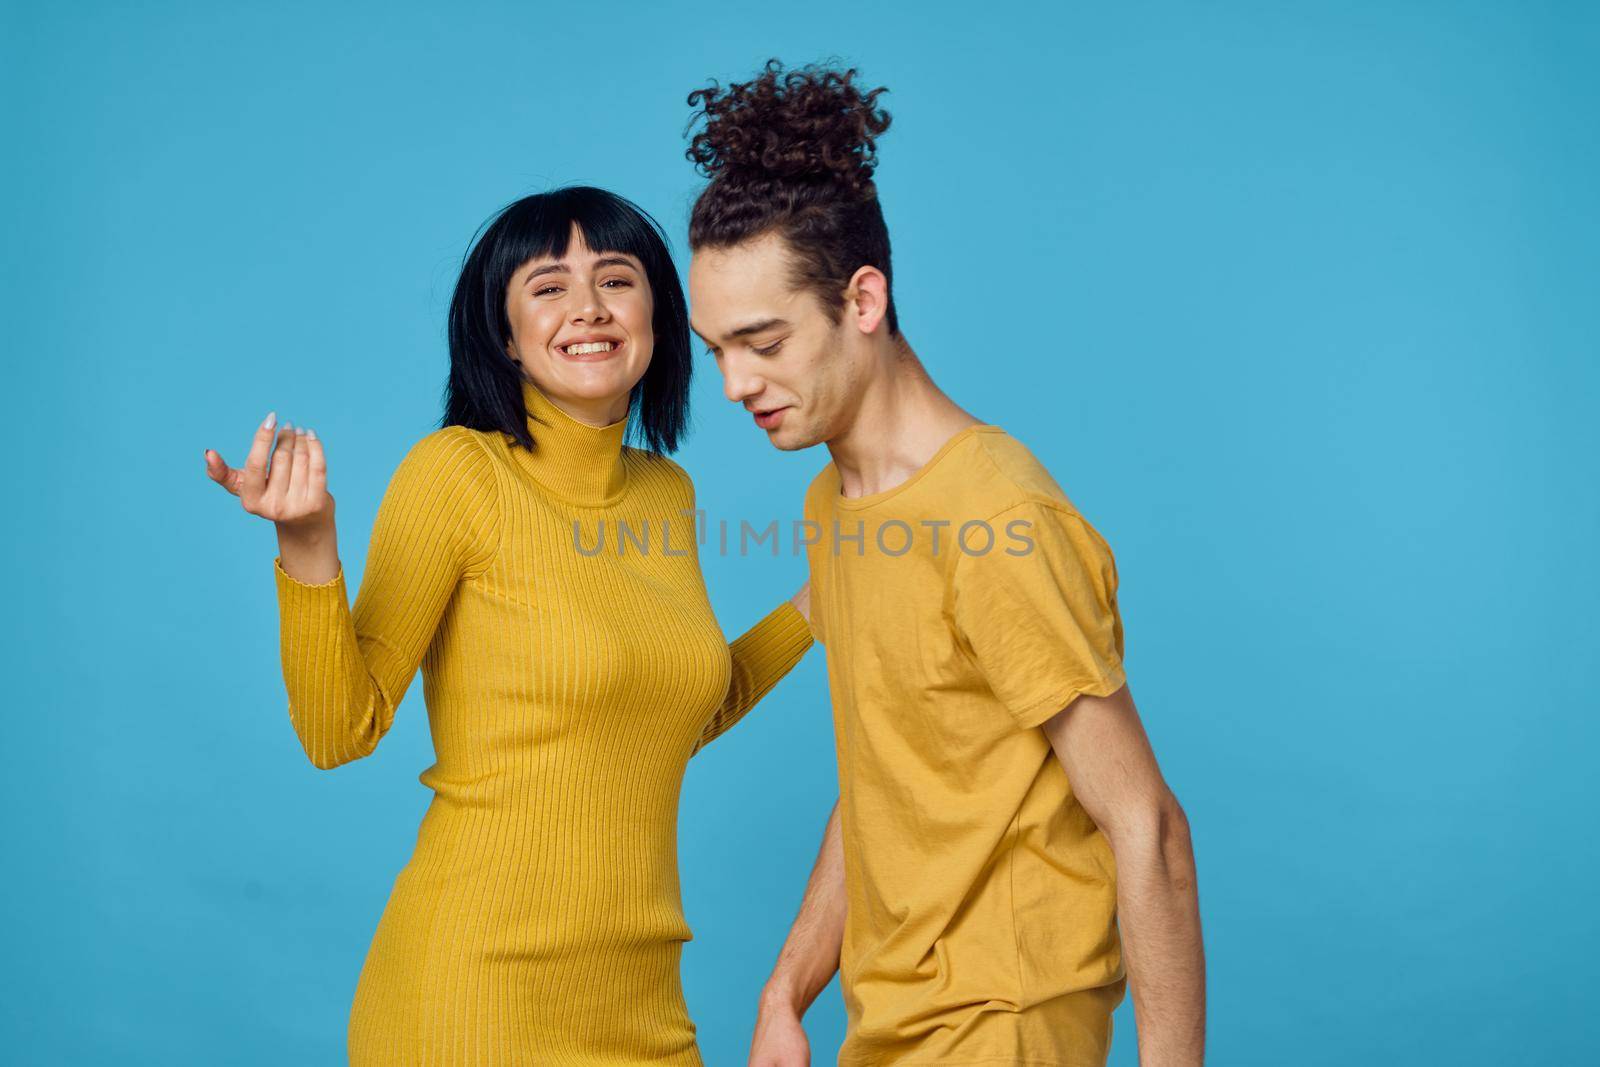 kinky guy and girl together friendship fun blue background by Vichizh